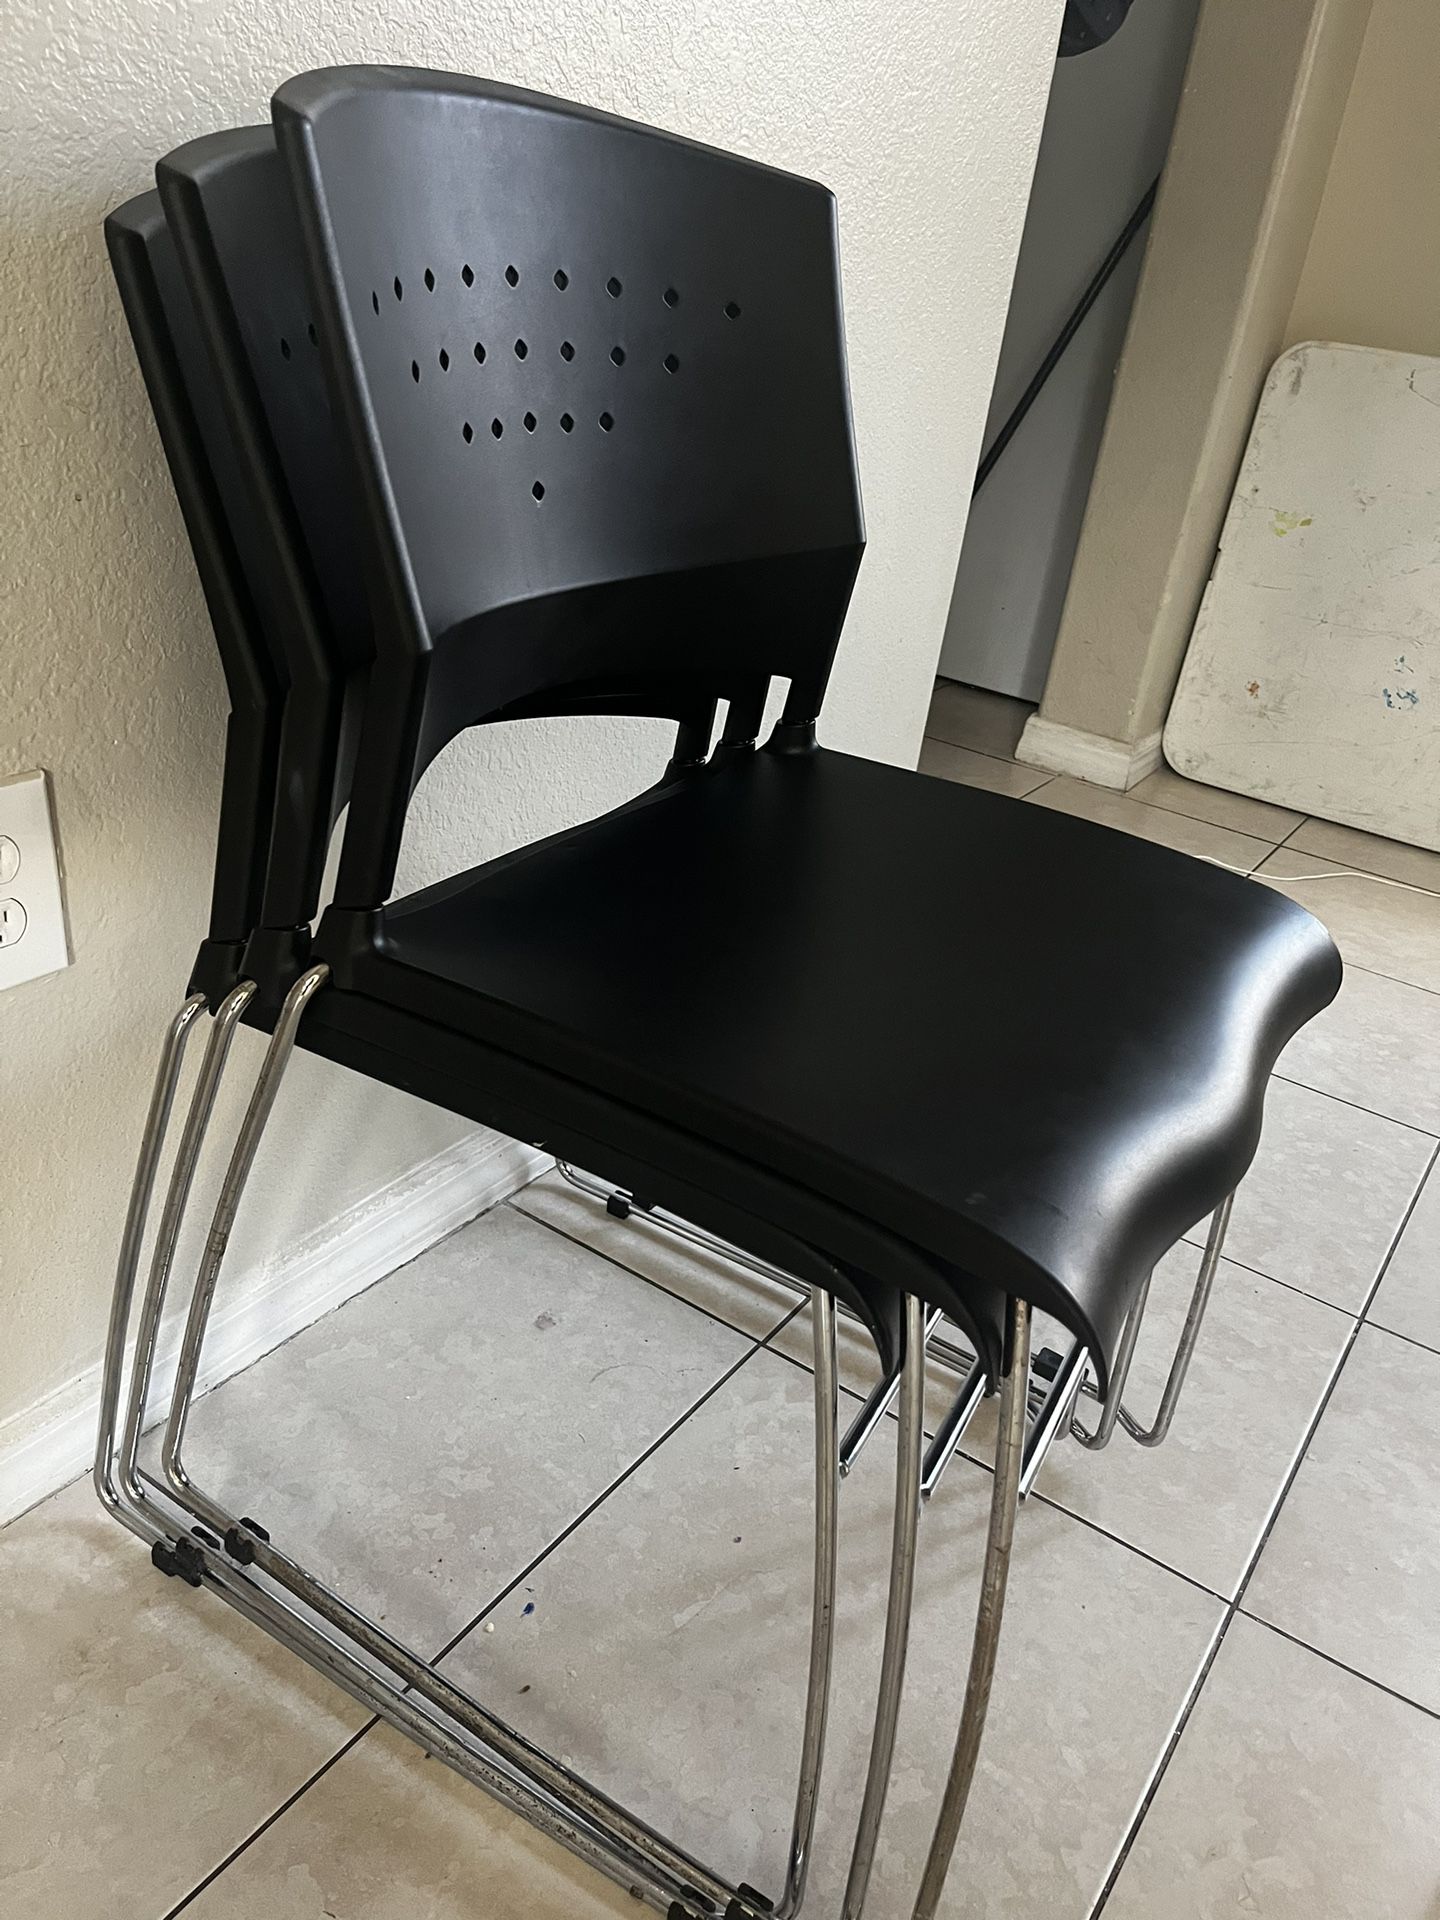 4 Black Office Or School Chairs